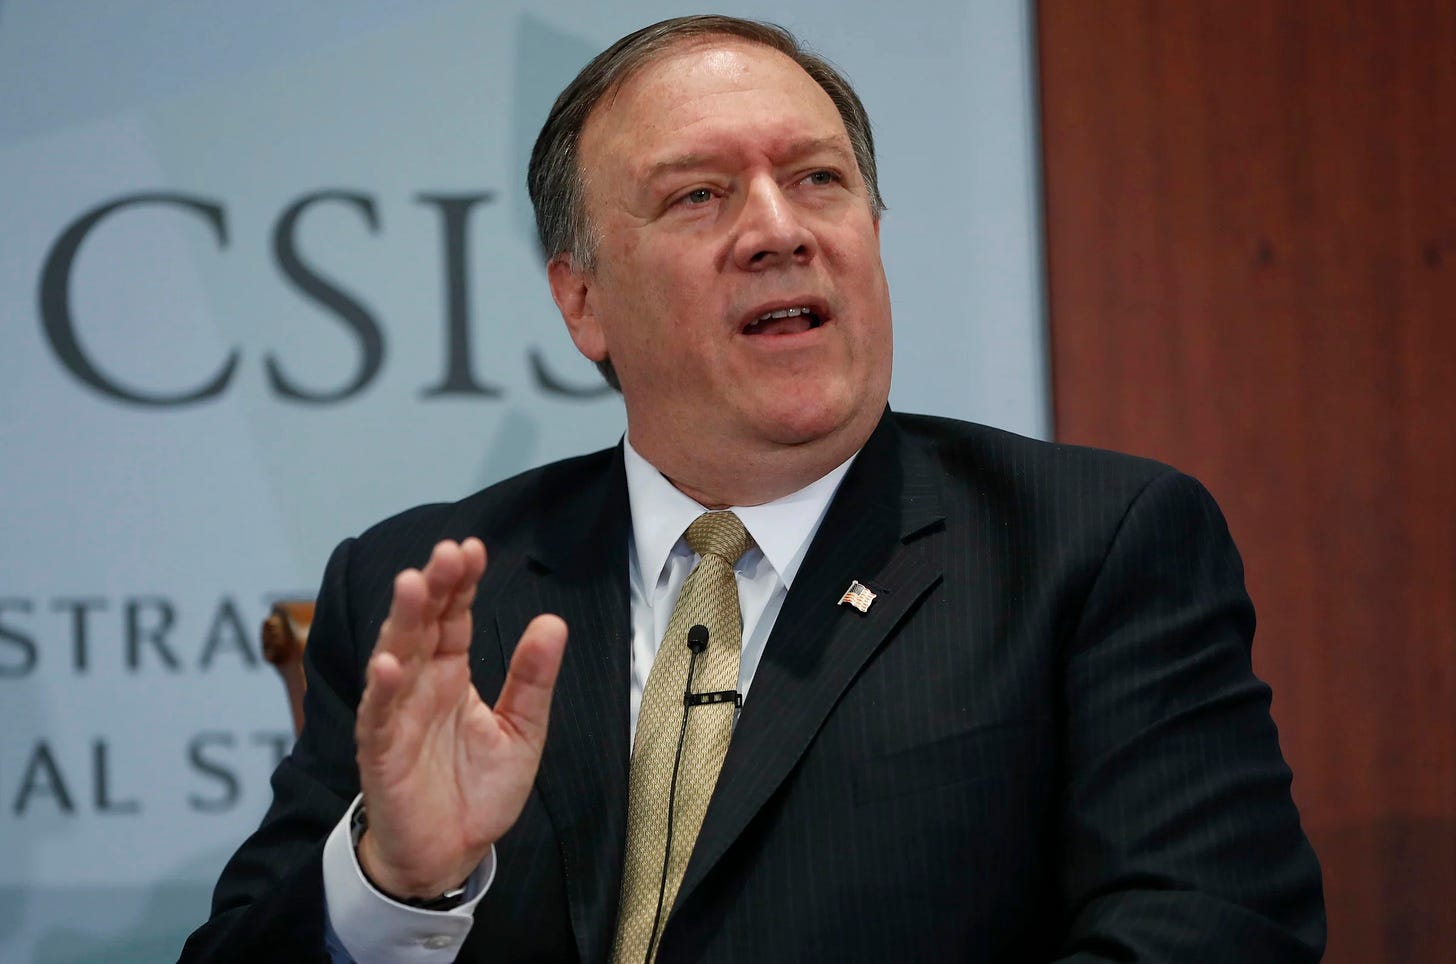 CIA Director Mike Pompeo answers questions at the Center for Strategic and International Studies (CSIS) in Washington, Thursday, April 13, 2017. Pompeo  denounced WikiLeaks, calling the anti-secrecy group a 